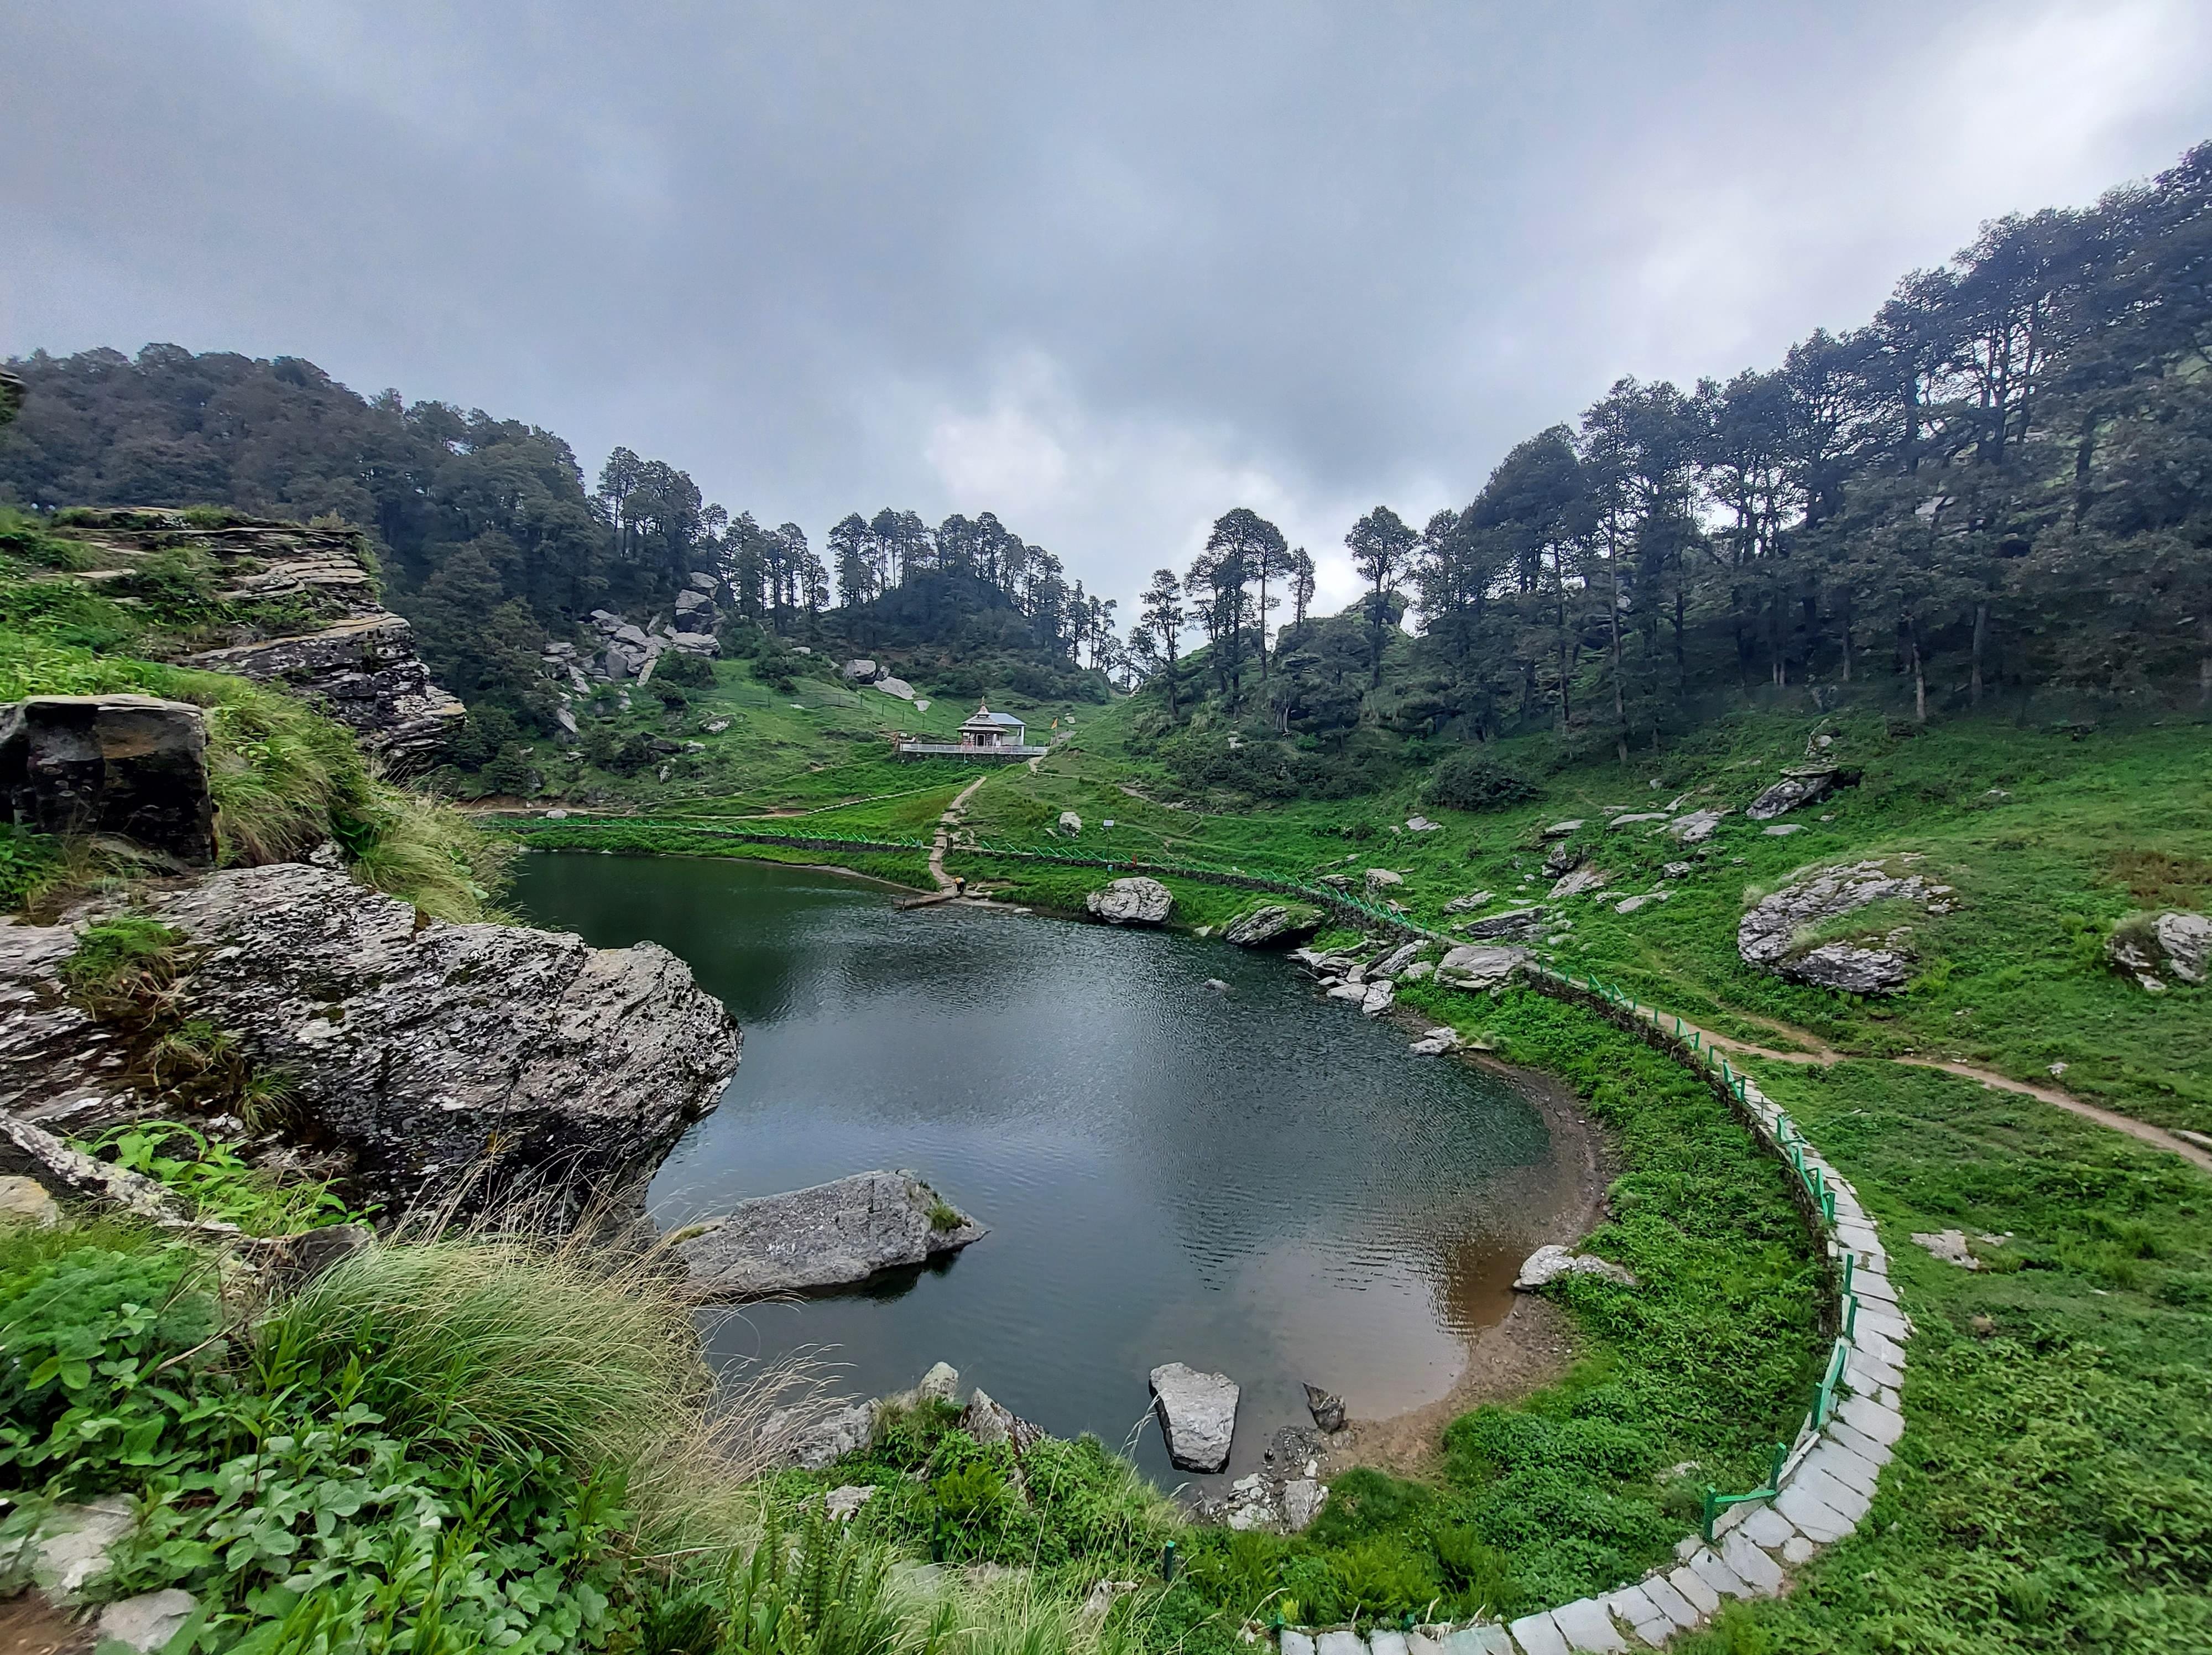 Dhanaulti Packages from Nagpur | Get Upto 40% Off